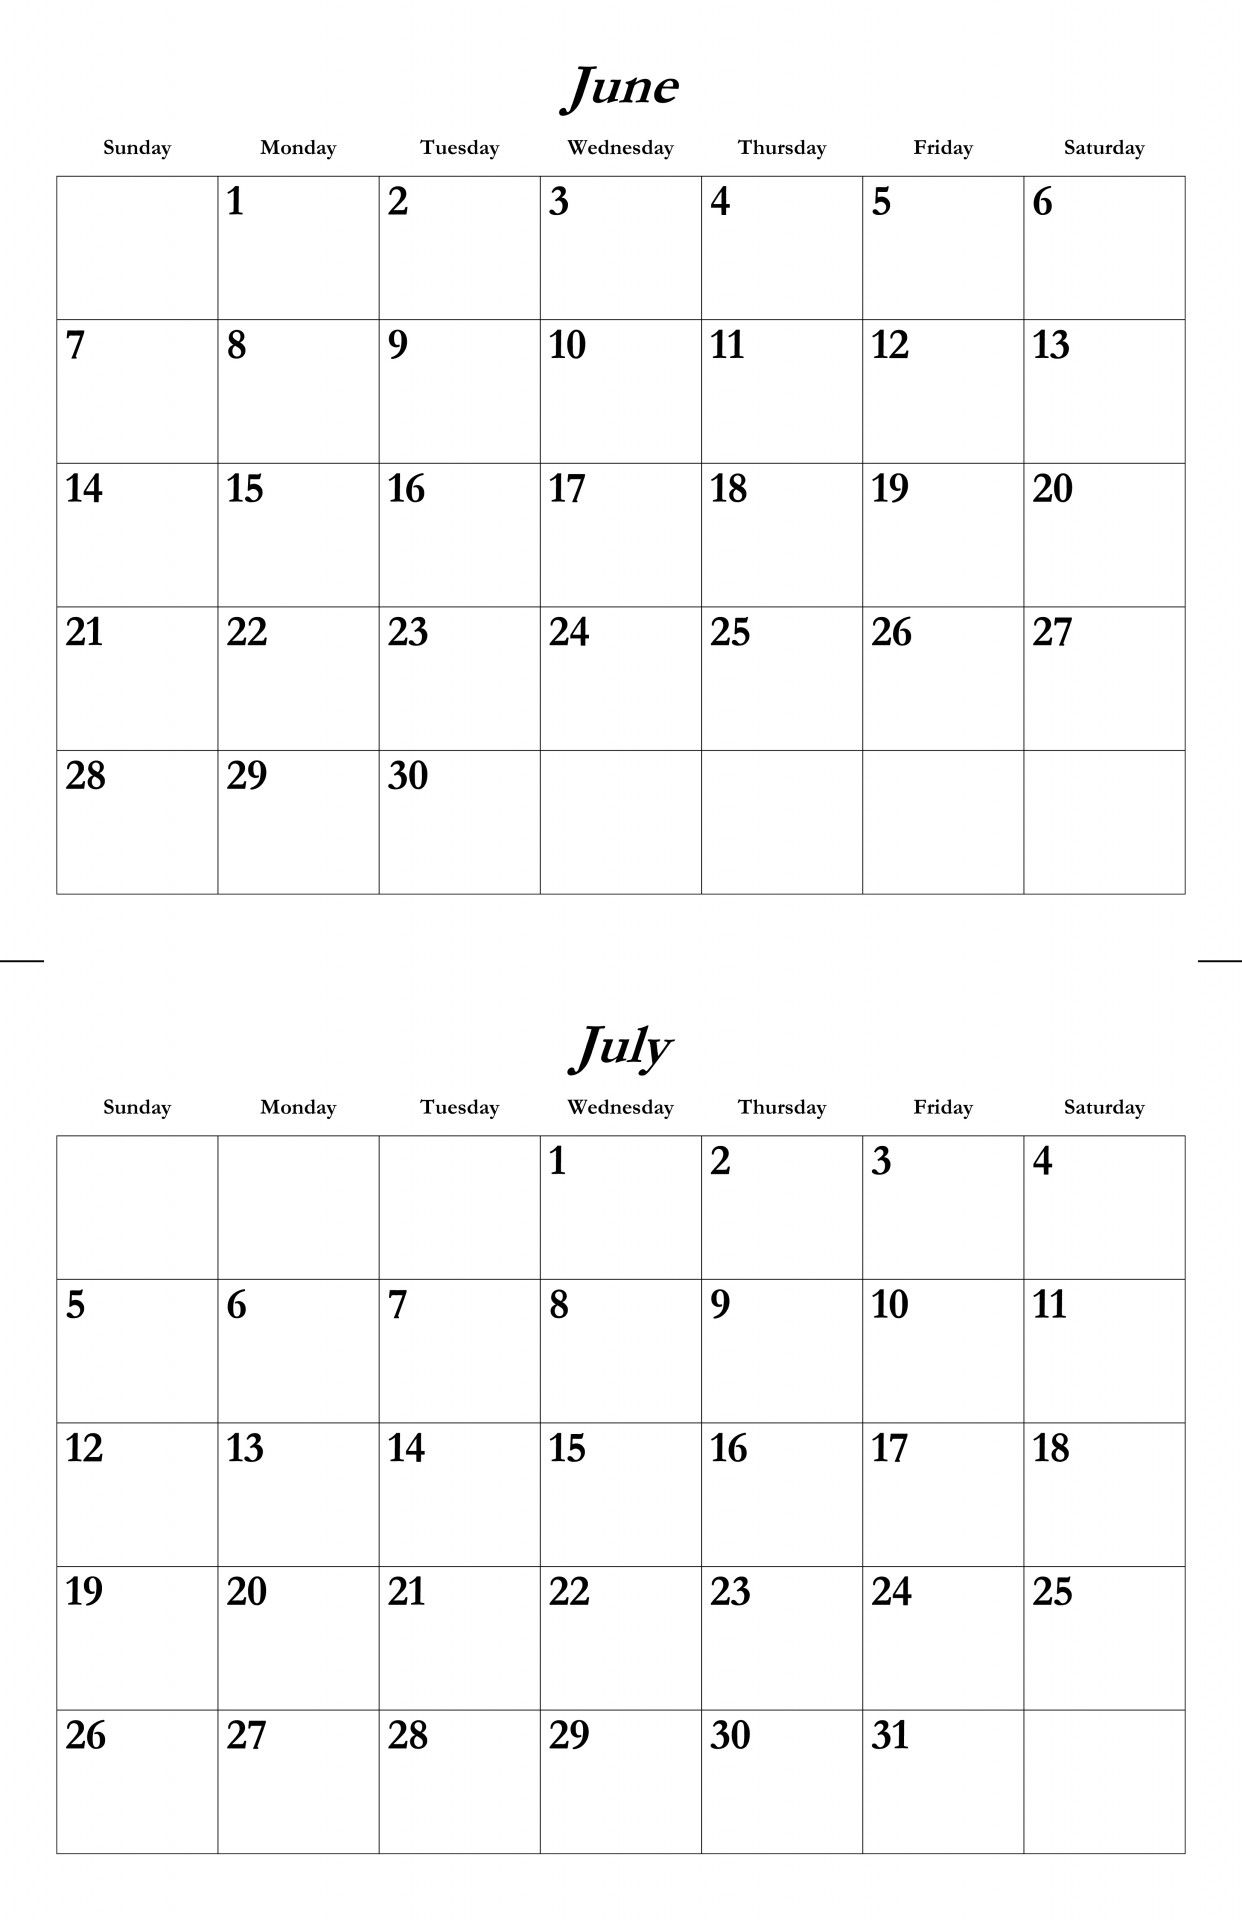 June And July 2015 Calendars - Cocu.seattlebaby.co regarding Calender For June And July